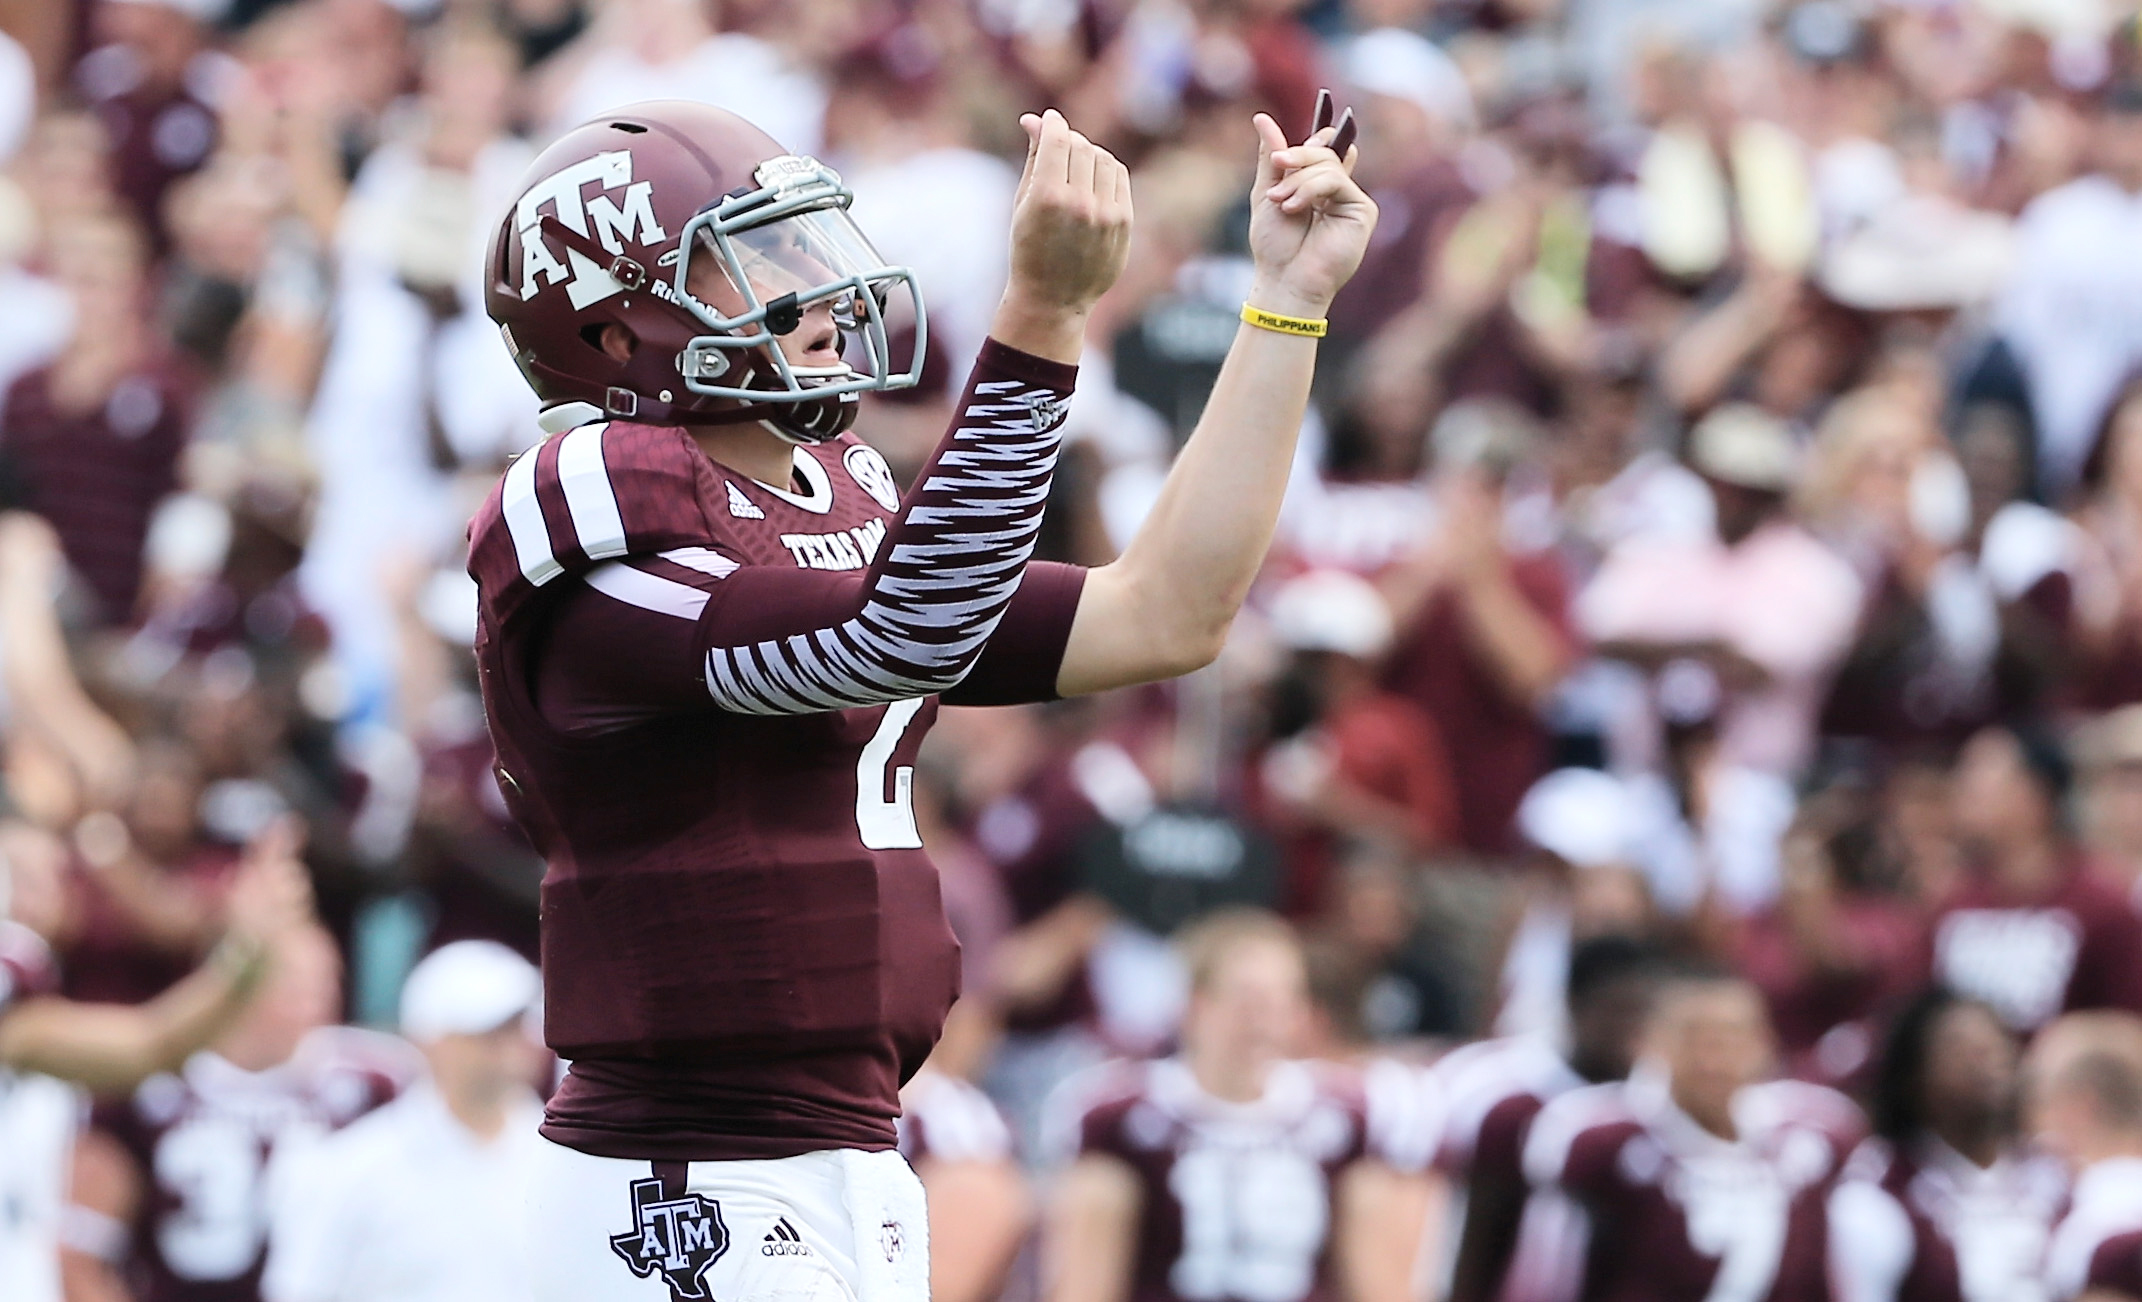 PHOTO: Johnny Manziel #2 of the Texas A&M Aggies celebrates a third quarter touchdown during the game against the Rice Owls at Kyle Field in this Aug. 31, 2013 file photo in College Station, Texas.